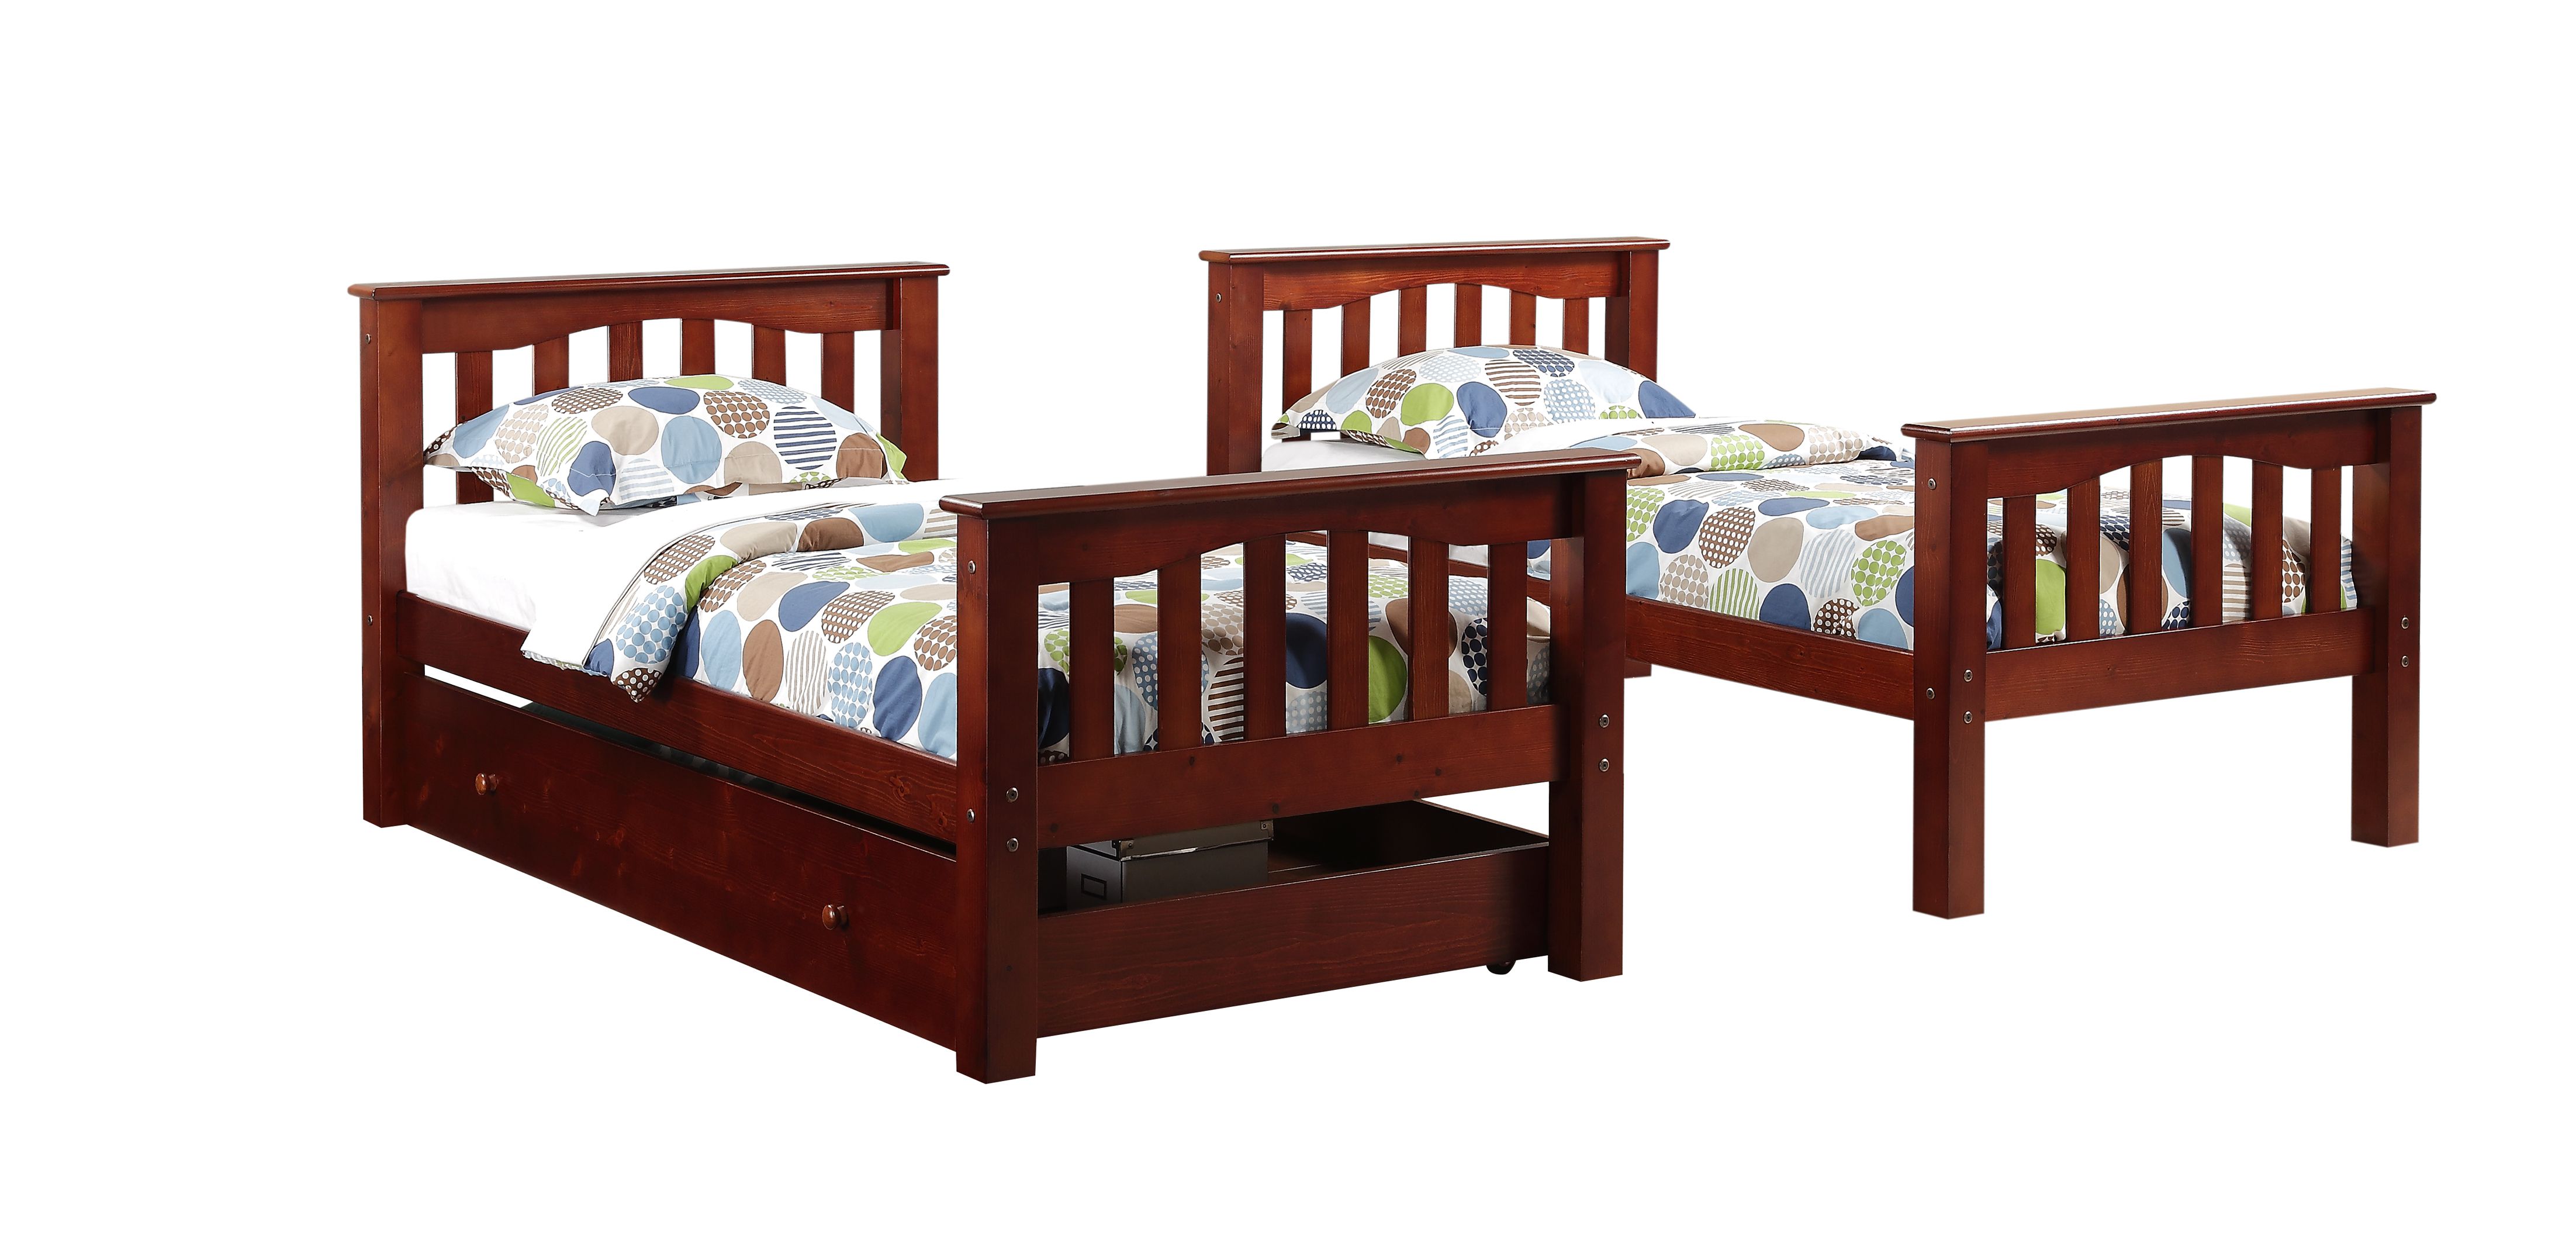 Berkley Jensen Twin Size Bunk Bed With, Bjs Bunk Bed With Trundle Instructions